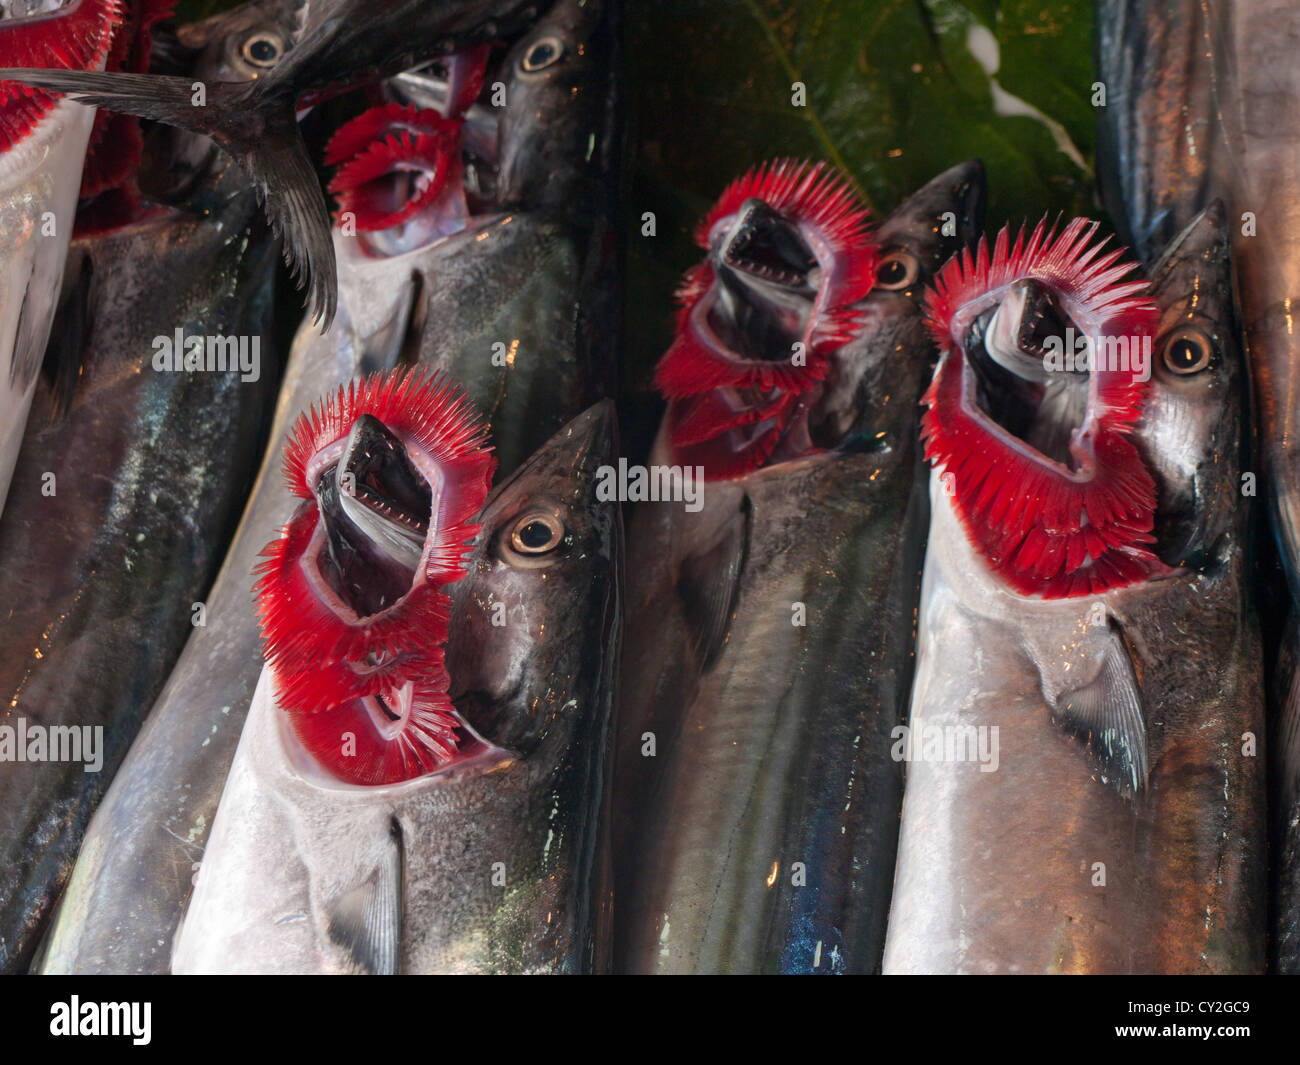 Fresh fish is easy to recognize on the gills , they should be red, photo from the fish marked in Karakoy Istanbul Turkey Stock Photo